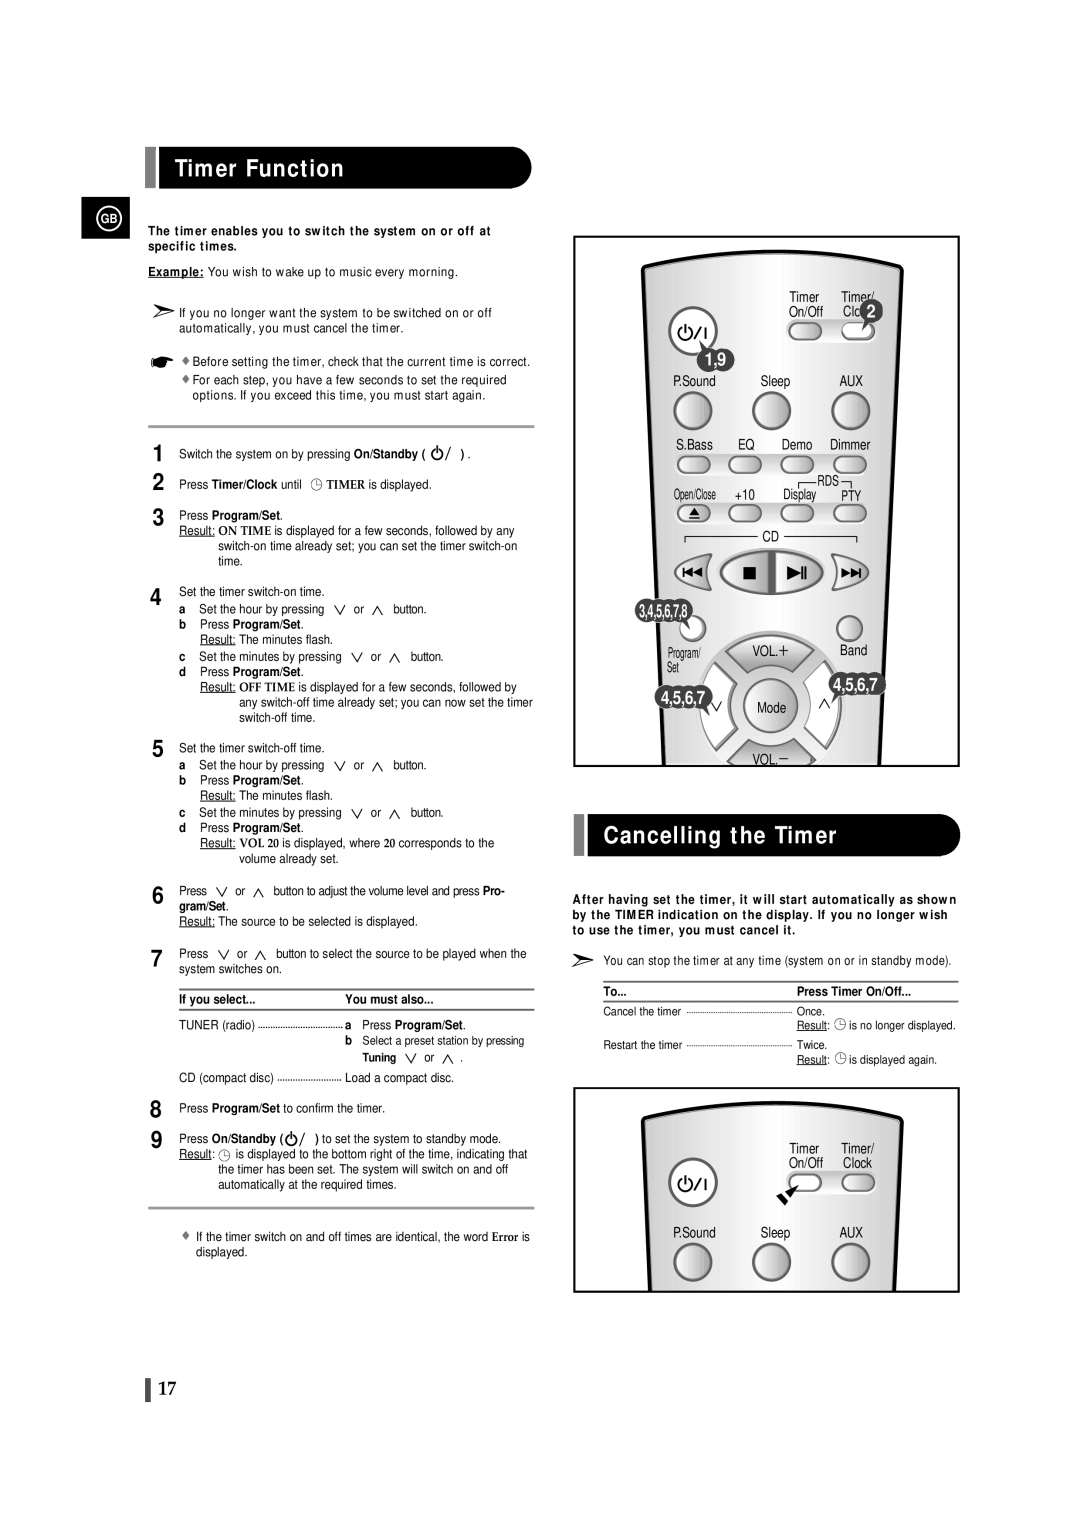 Samsung EV-1S instruction manual Timer Function, Cancelling the Timer, 3,4,5,6,7,8 